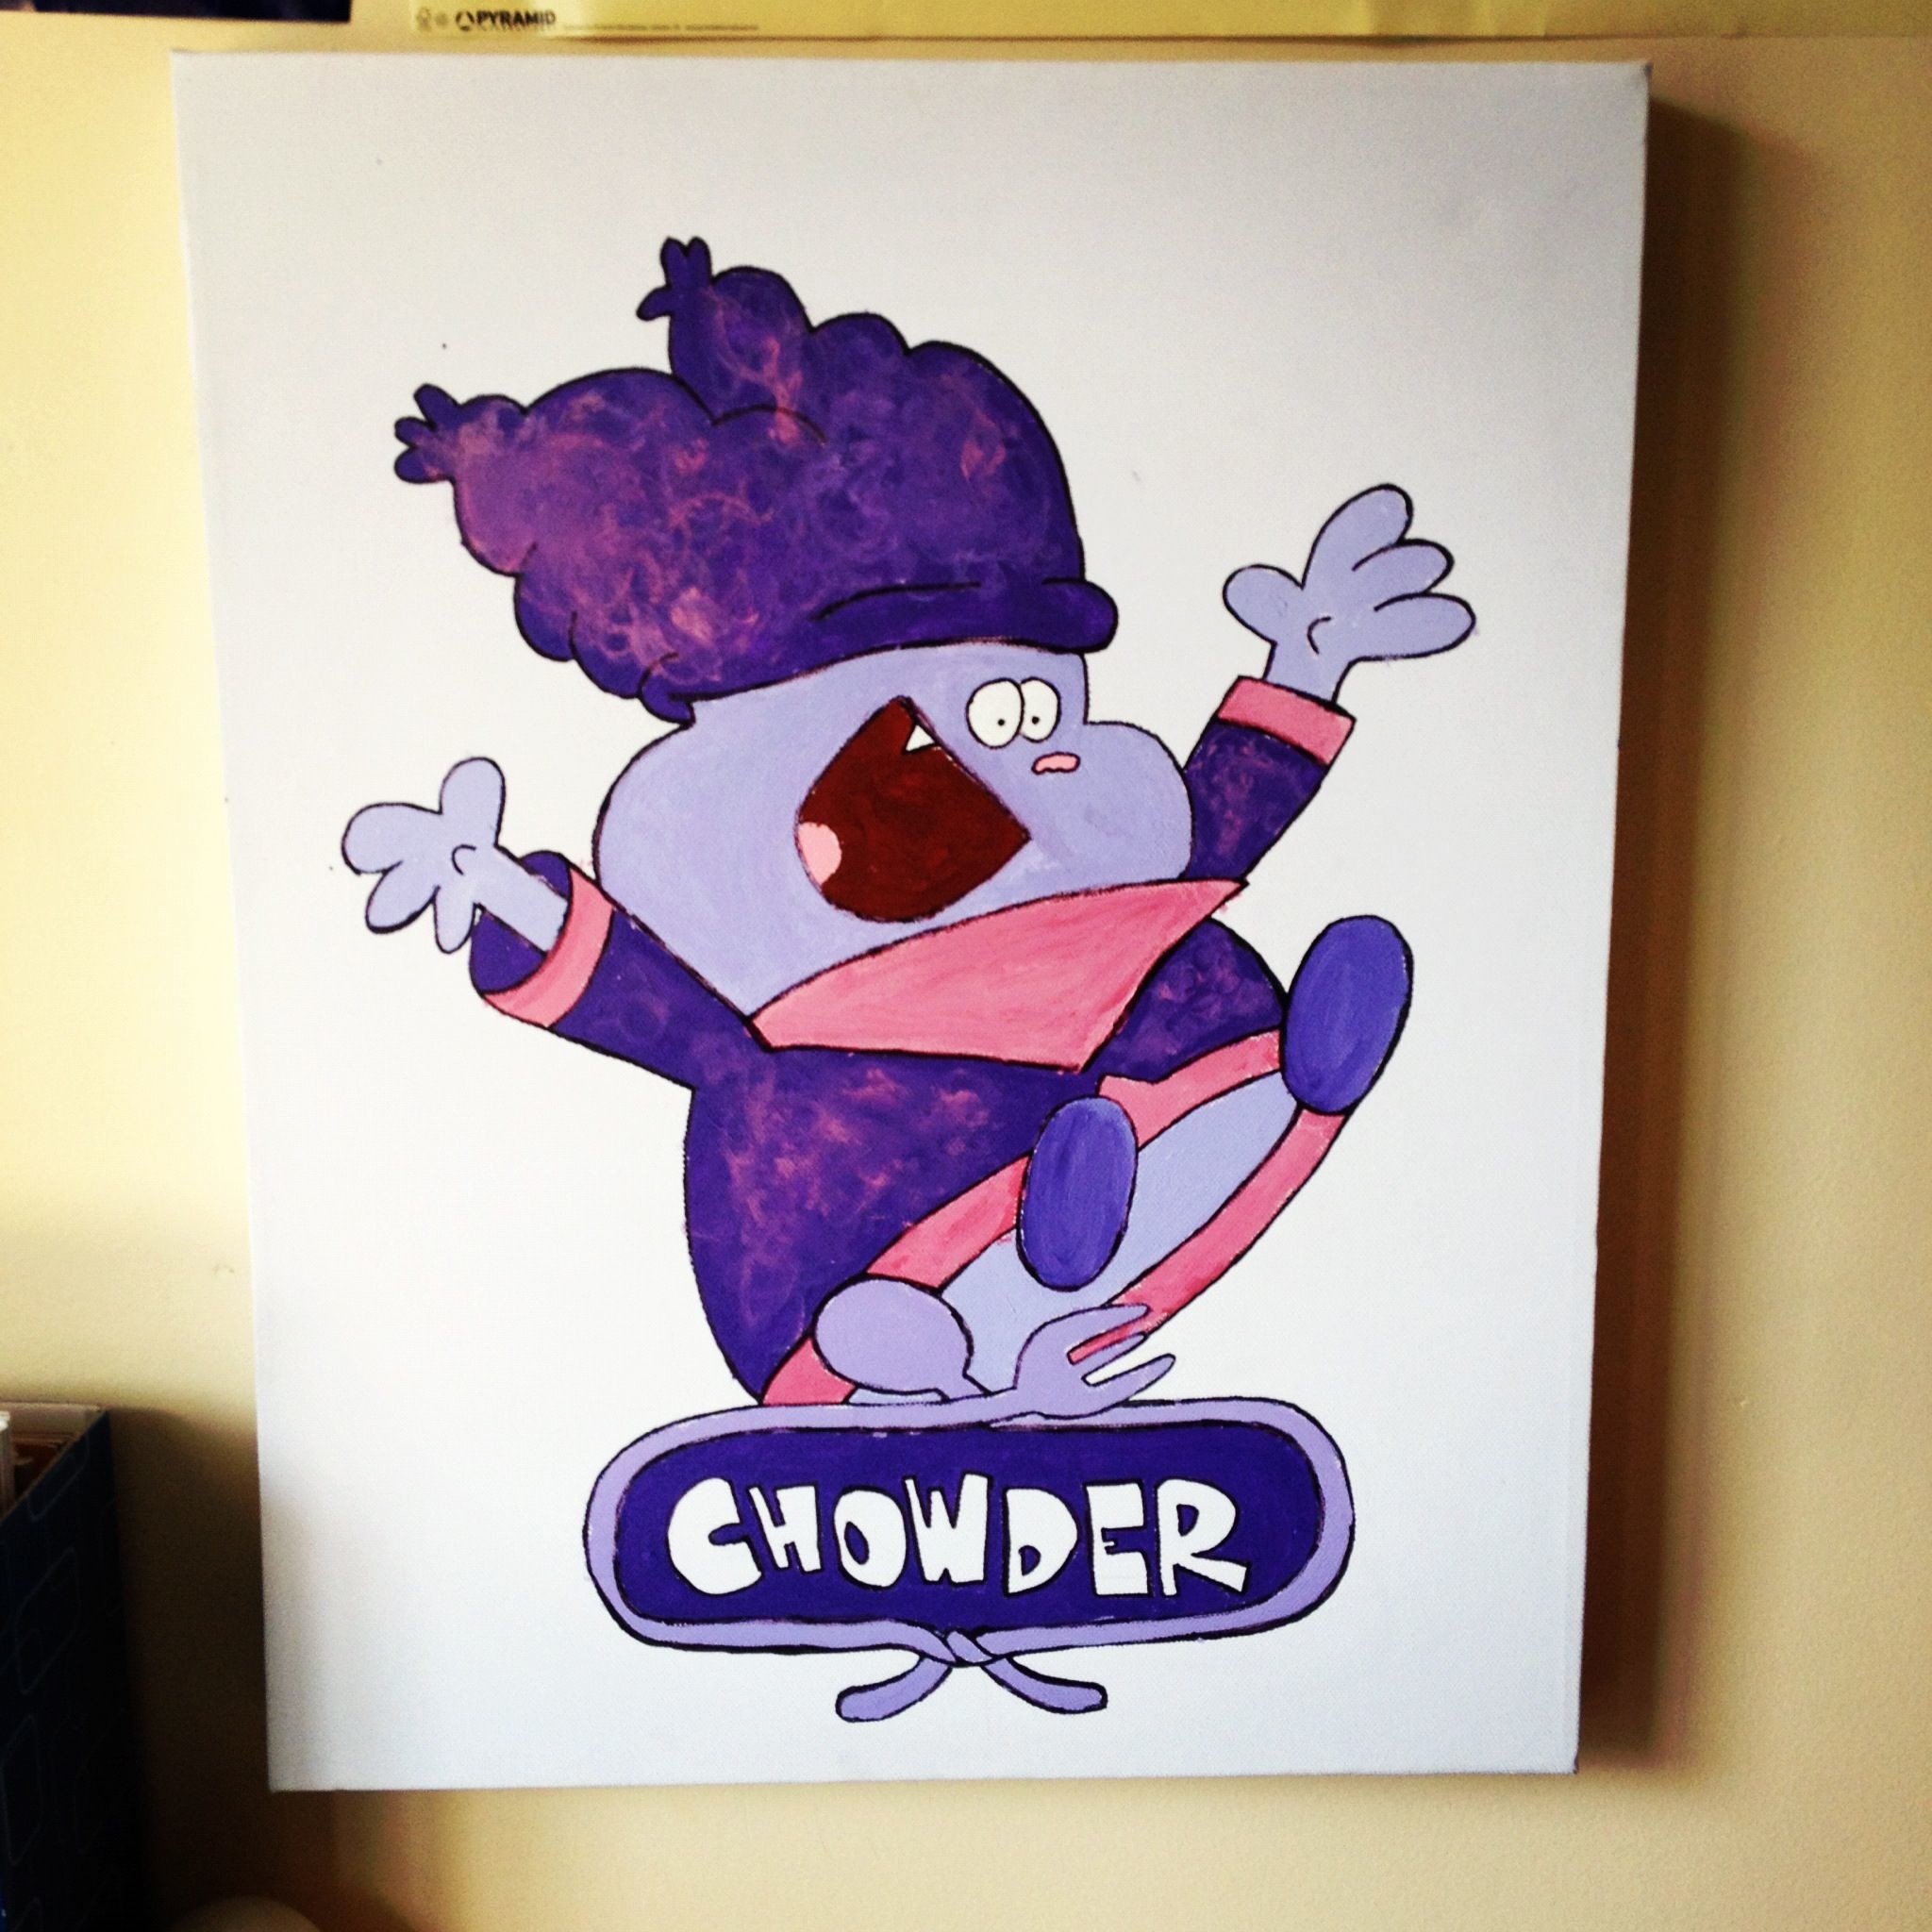 2048x2048 My painting of Chowder! #chowder #cartoonnetwork #art #painting